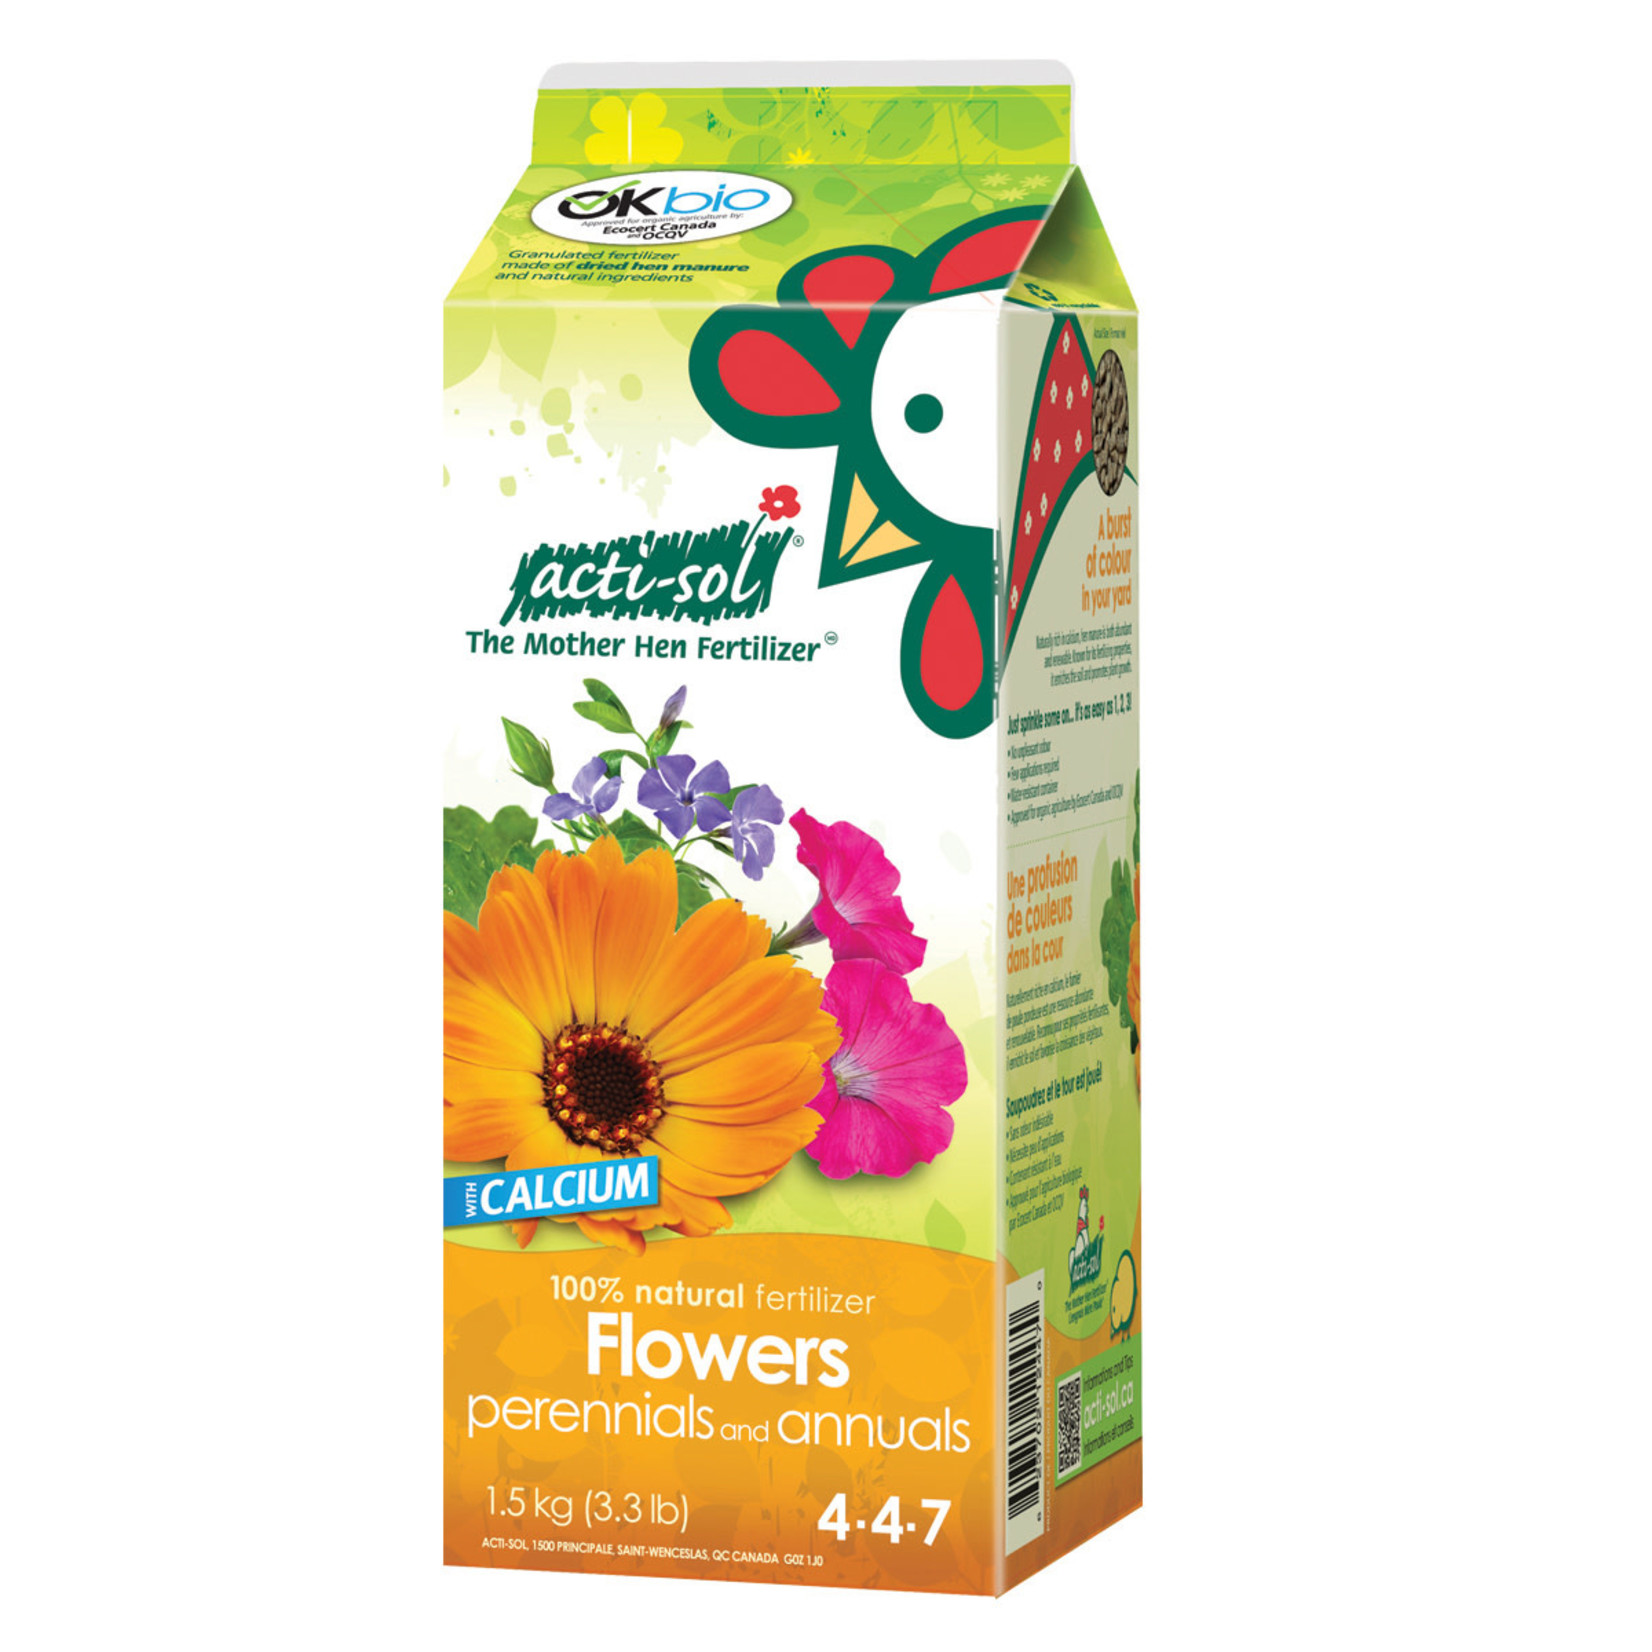 Acti-sol Perennials and Annual Flowers 4-4-7 1.5 kg